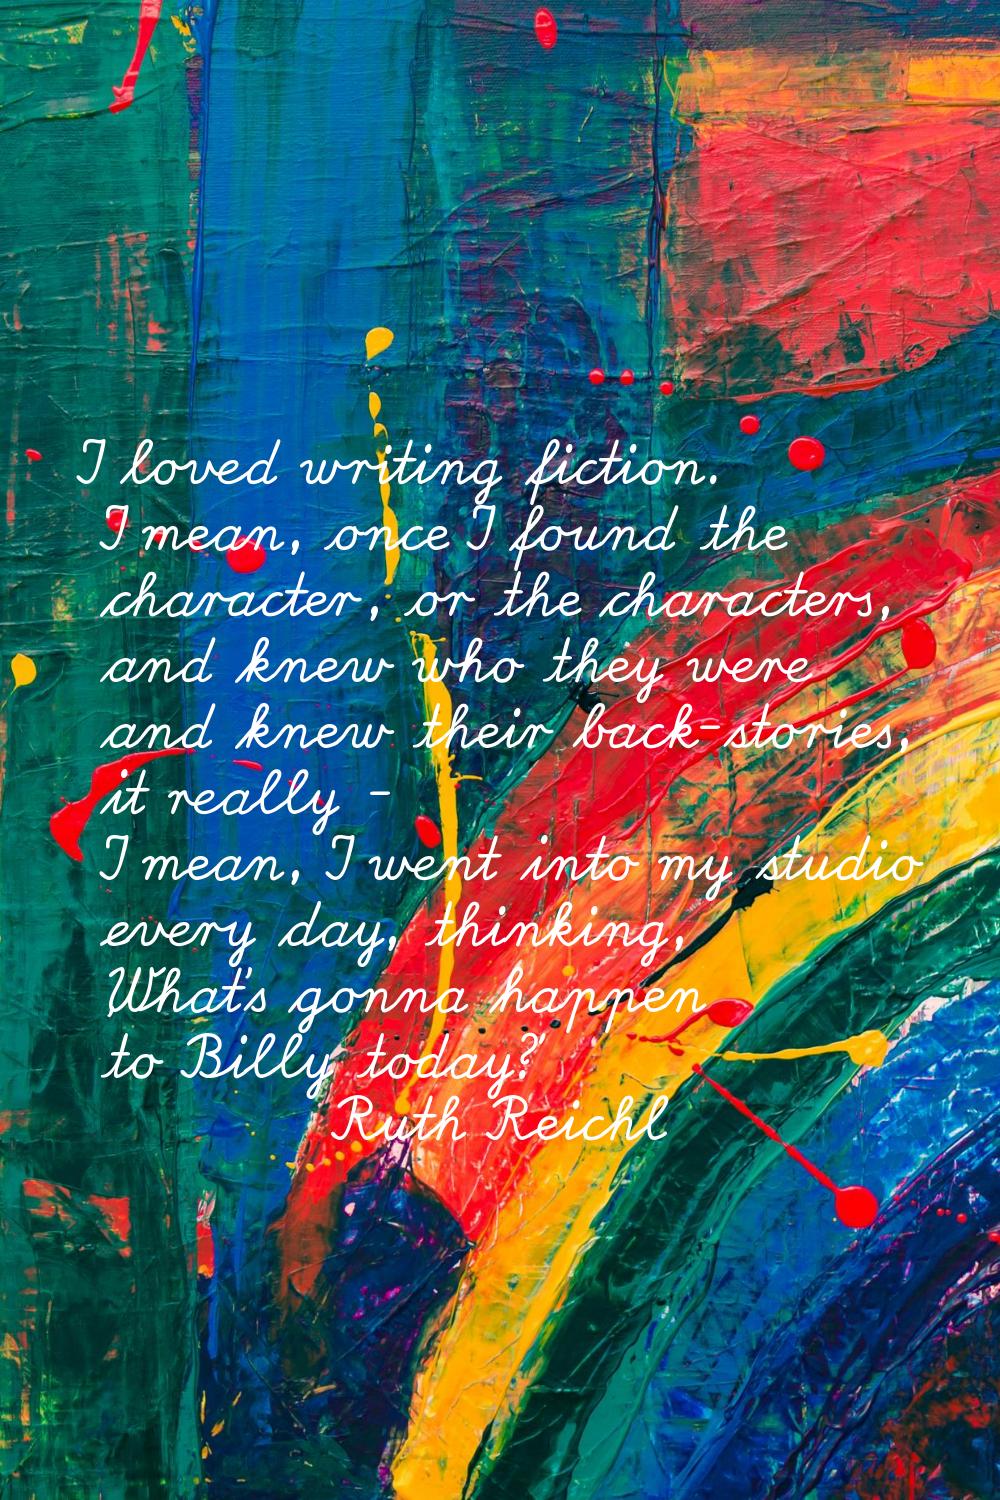 I loved writing fiction. I mean, once I found the character, or the characters, and knew who they w